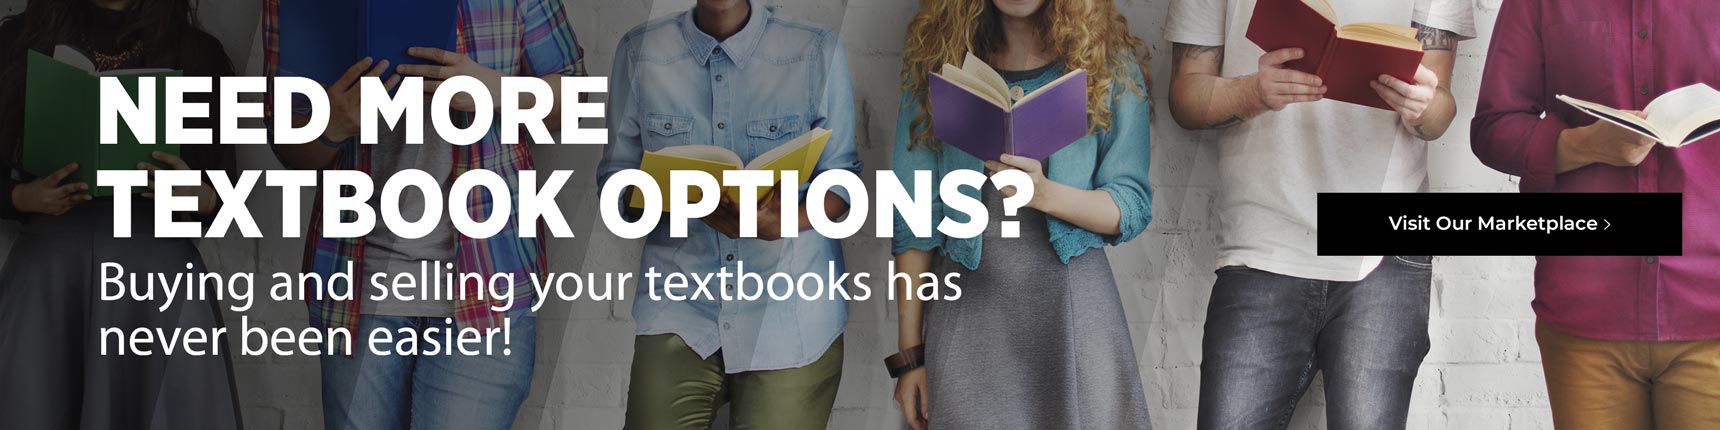 Need more textbook options? Buying and selling your textbooks has never been easier!